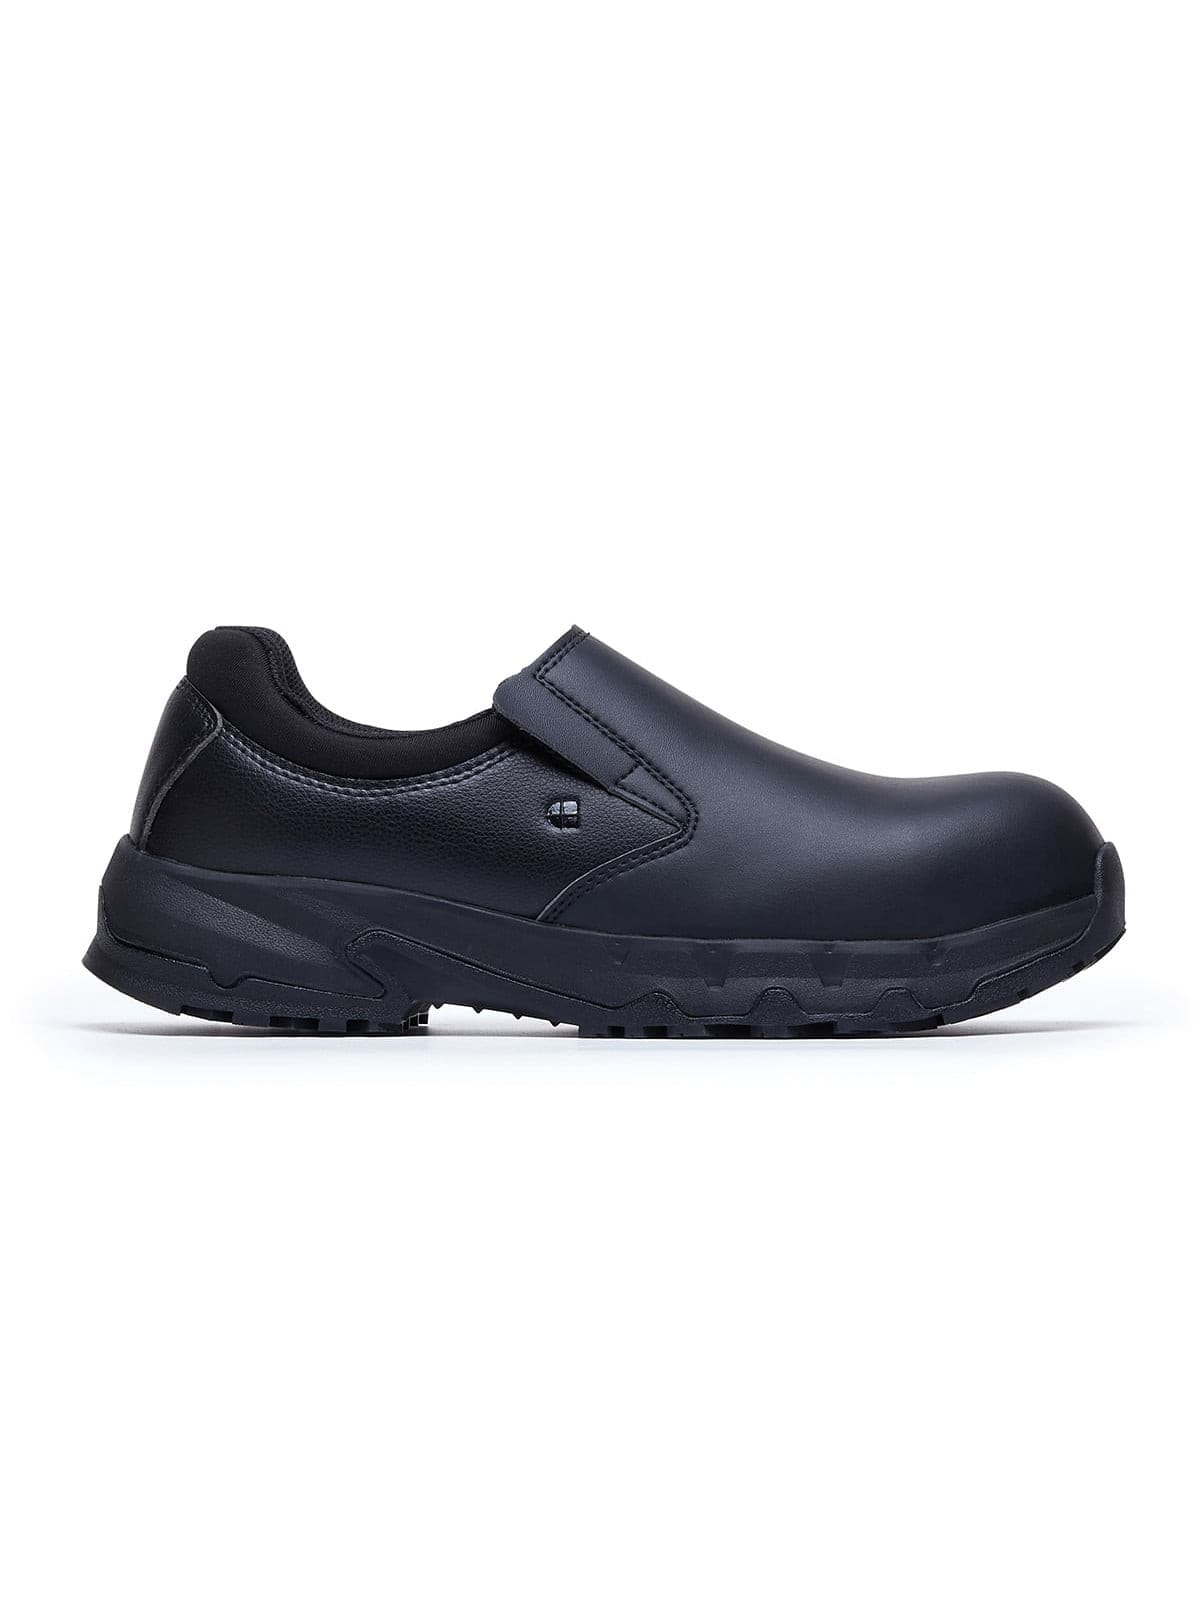 Unisex Safety Shoe Brandon Black (S3) by Shoes For Crews -  ChefsCotton